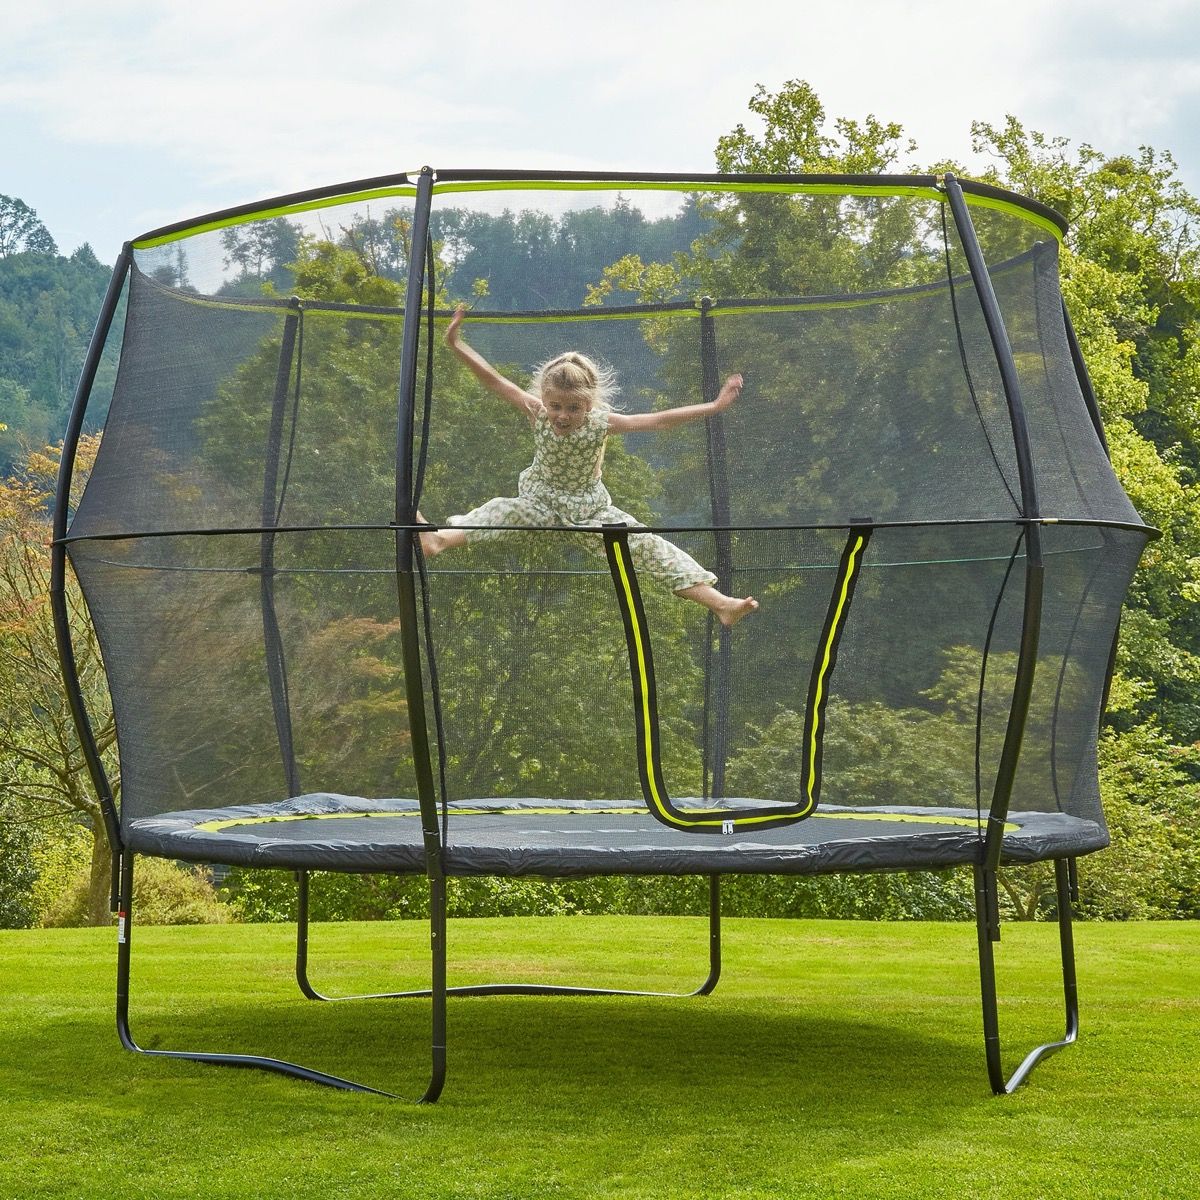 Rebo 10FT Base Jump Trampoline With Halo II Enclosure